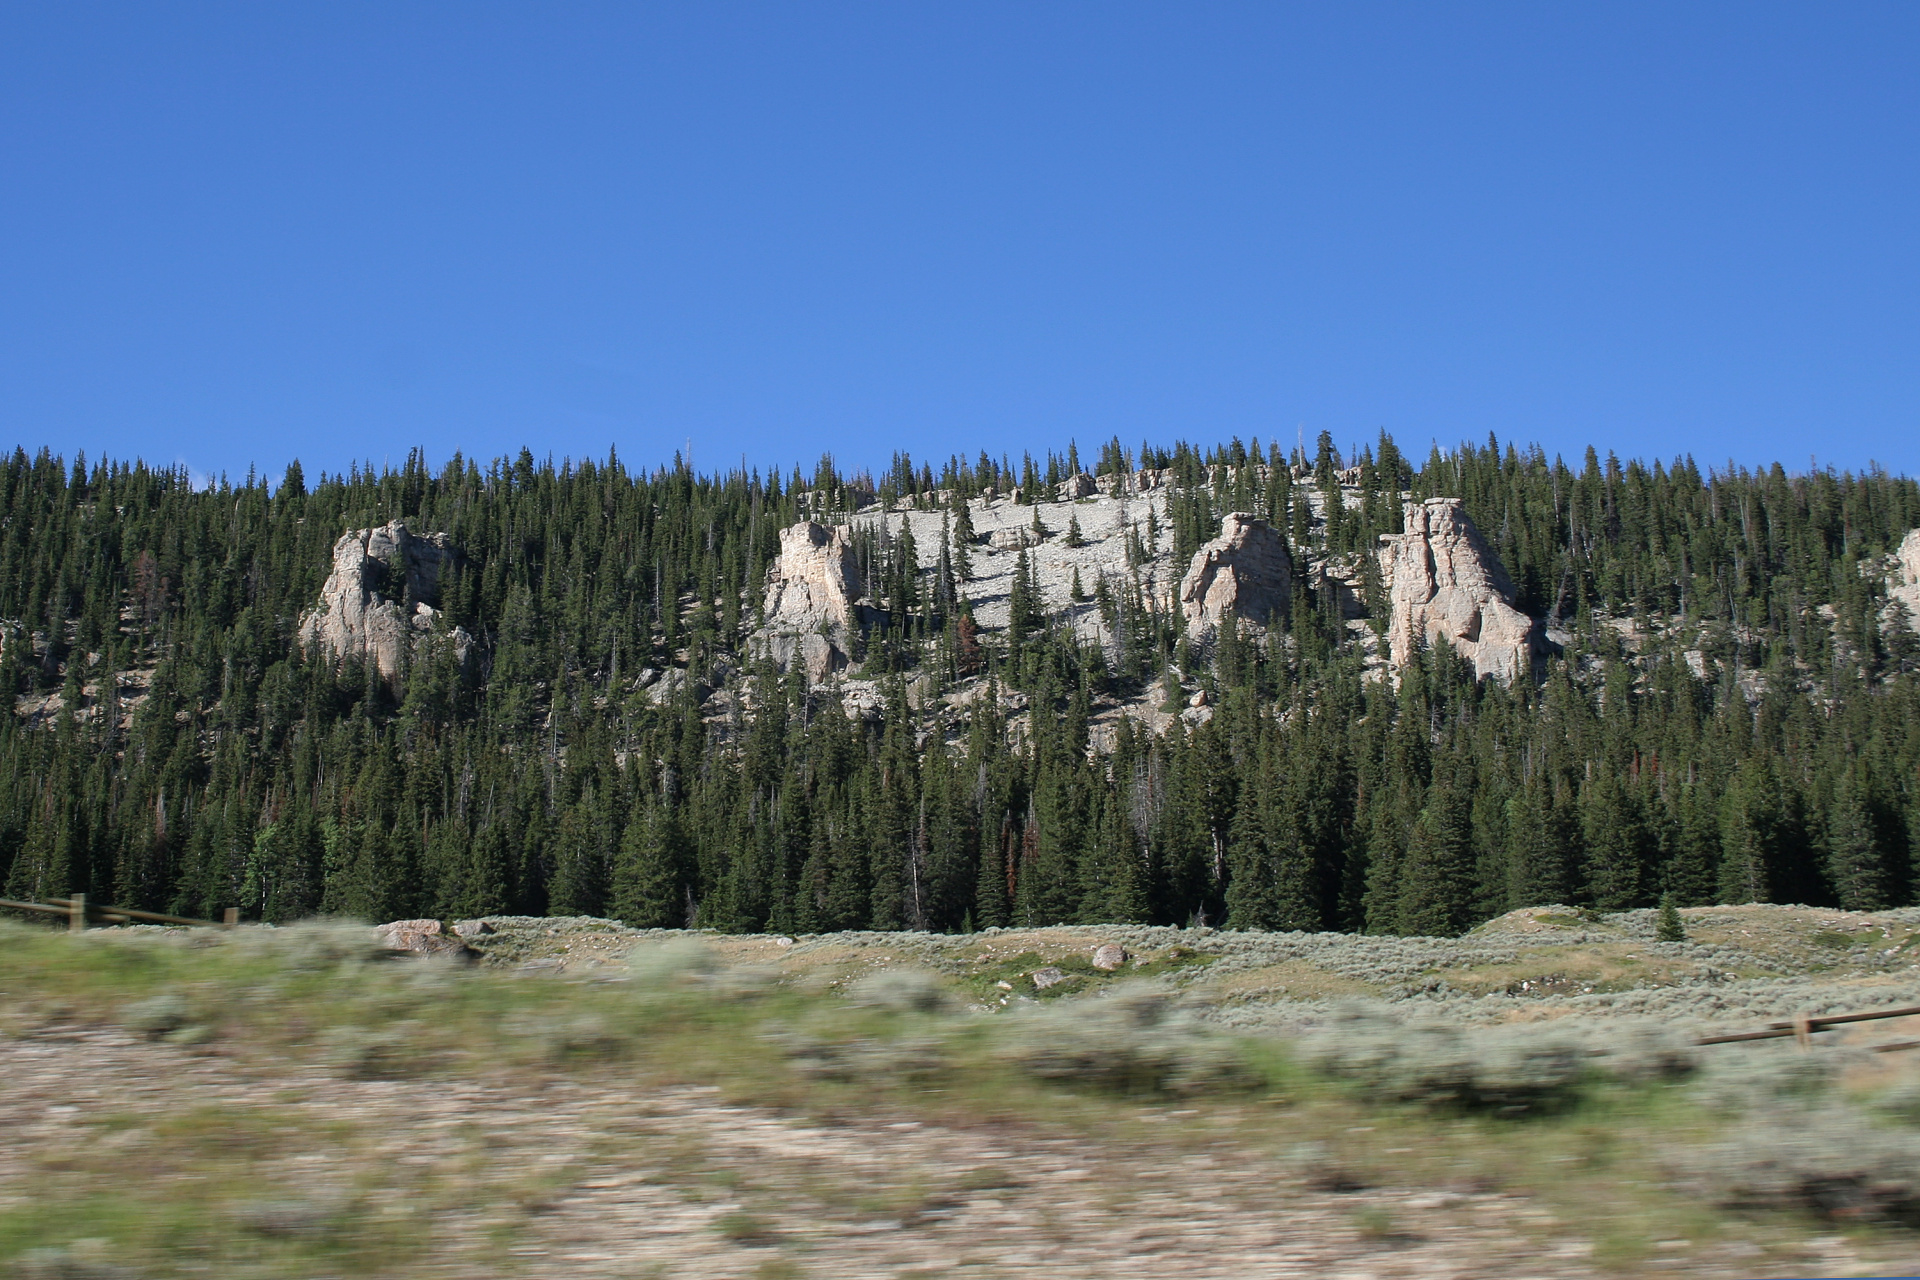 Rocks (Travels » US Trip 1: Cheyenne Country » The Journey » Bighorn Mountains)